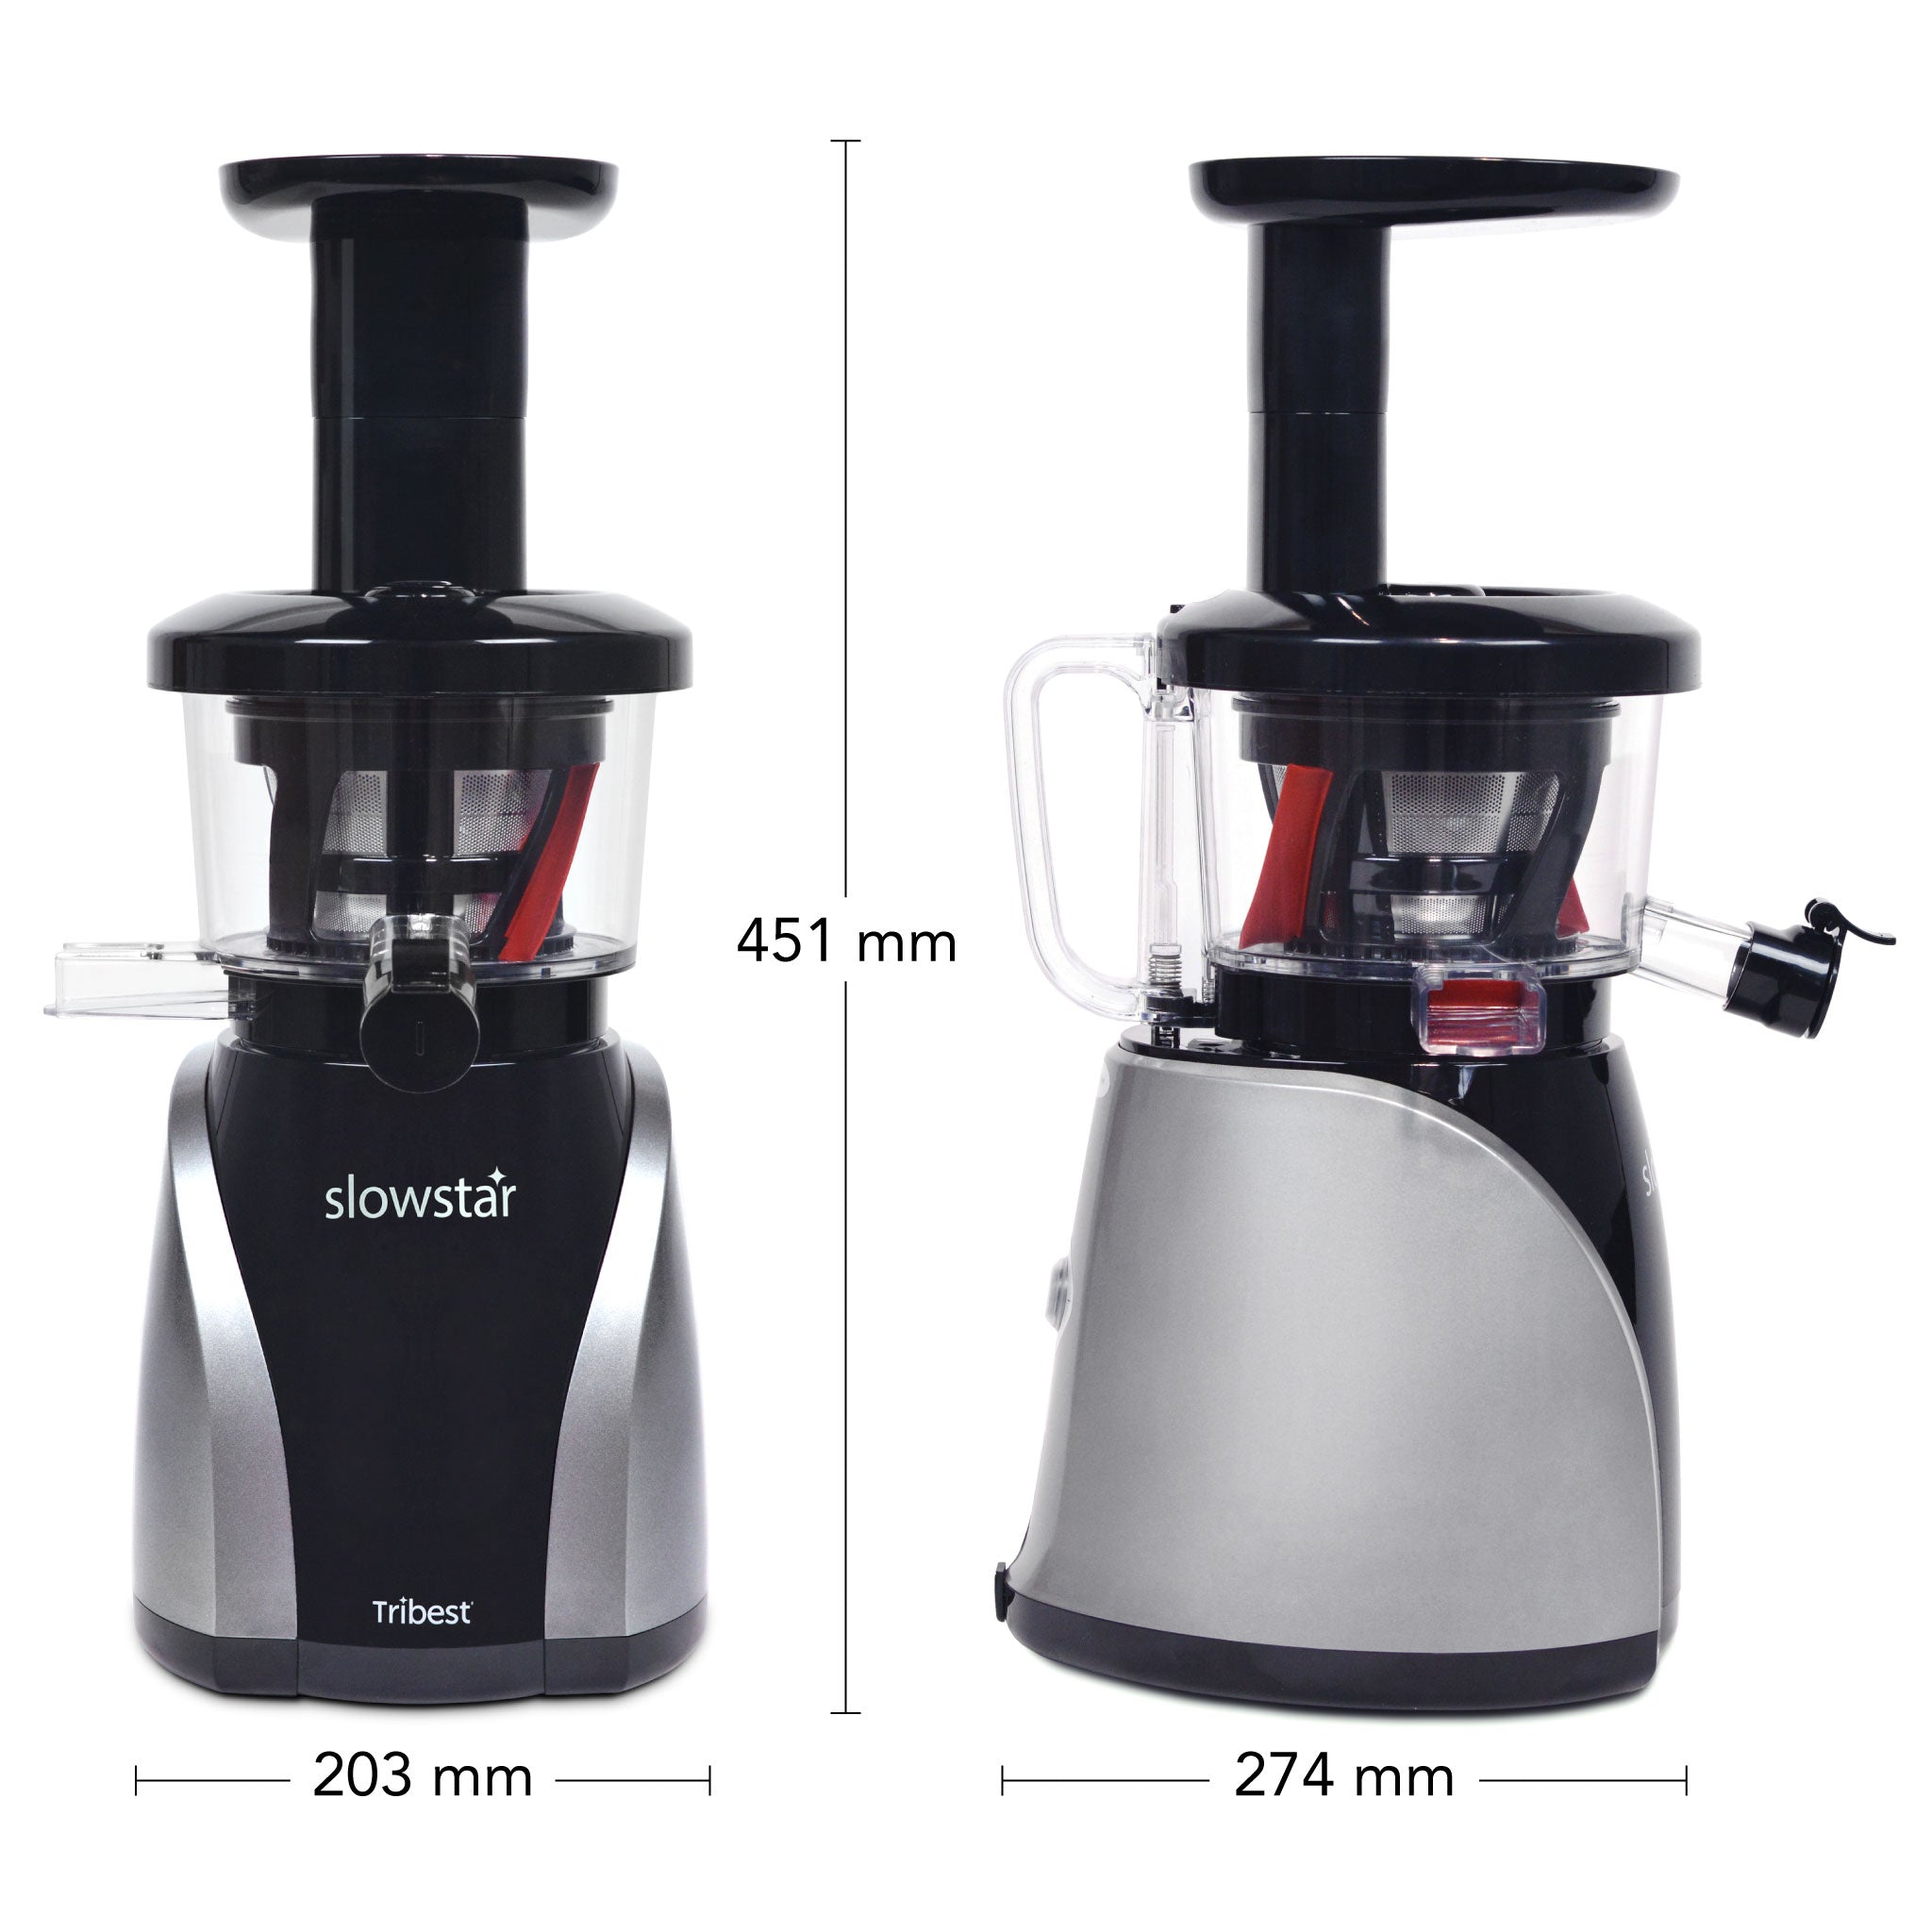 Slowstar Vertical Slow Juicer & Mincer in Silver SW-2020 - Size 203 x 274 x 451 mm